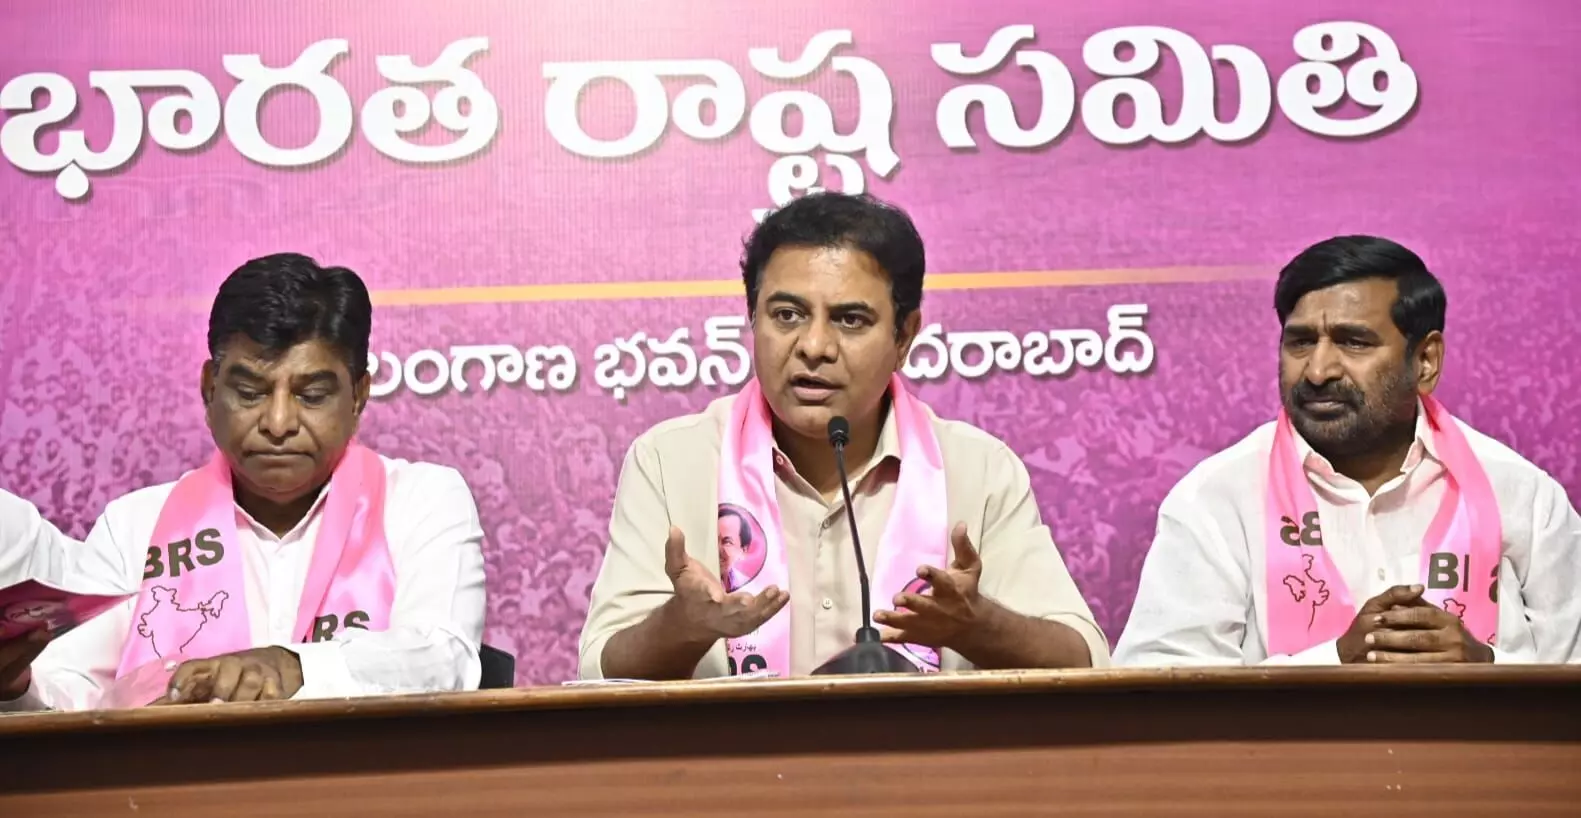 KTR predicts Congress likely to secure only one MP seat in Telangana